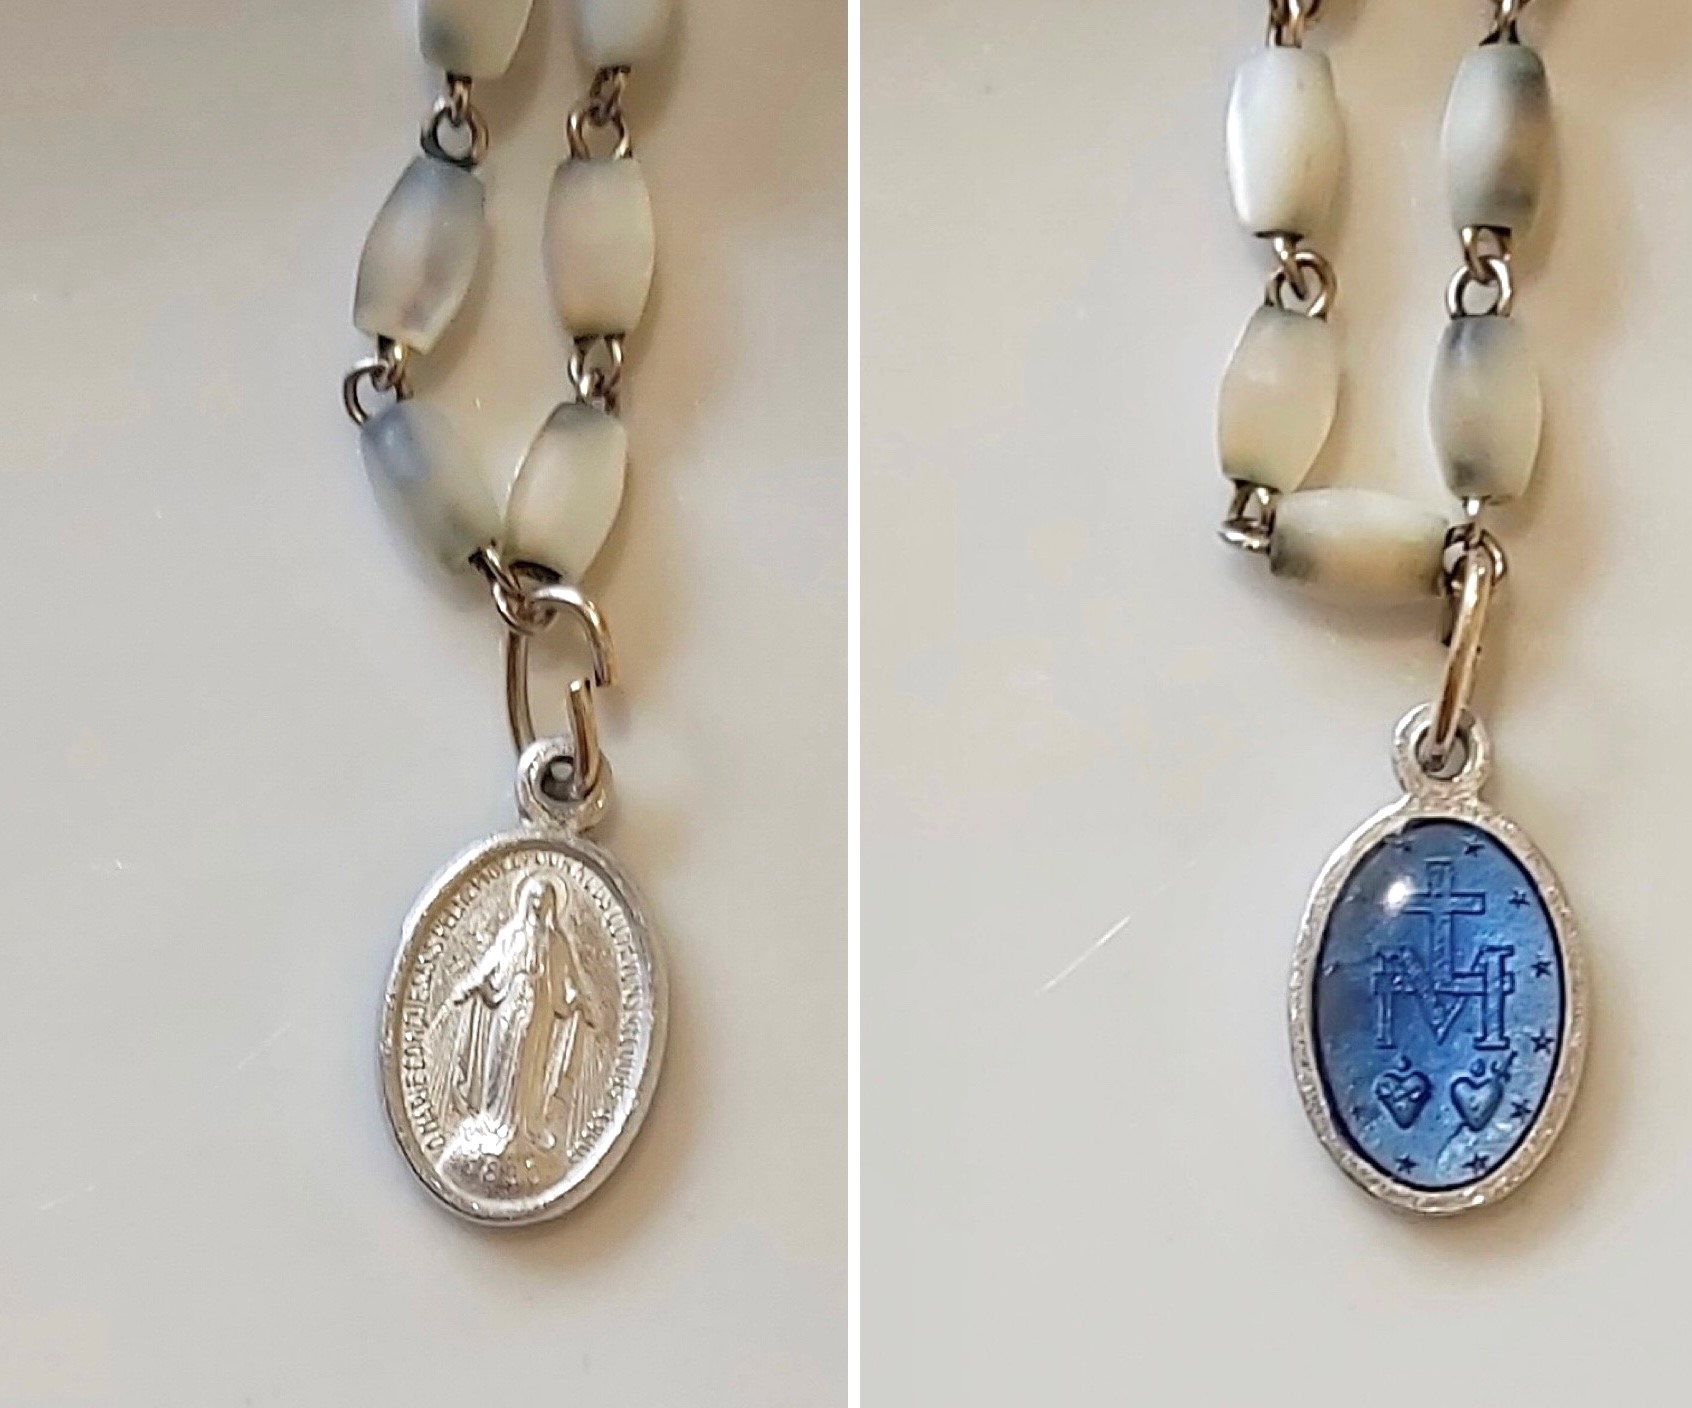 the miraculous medal